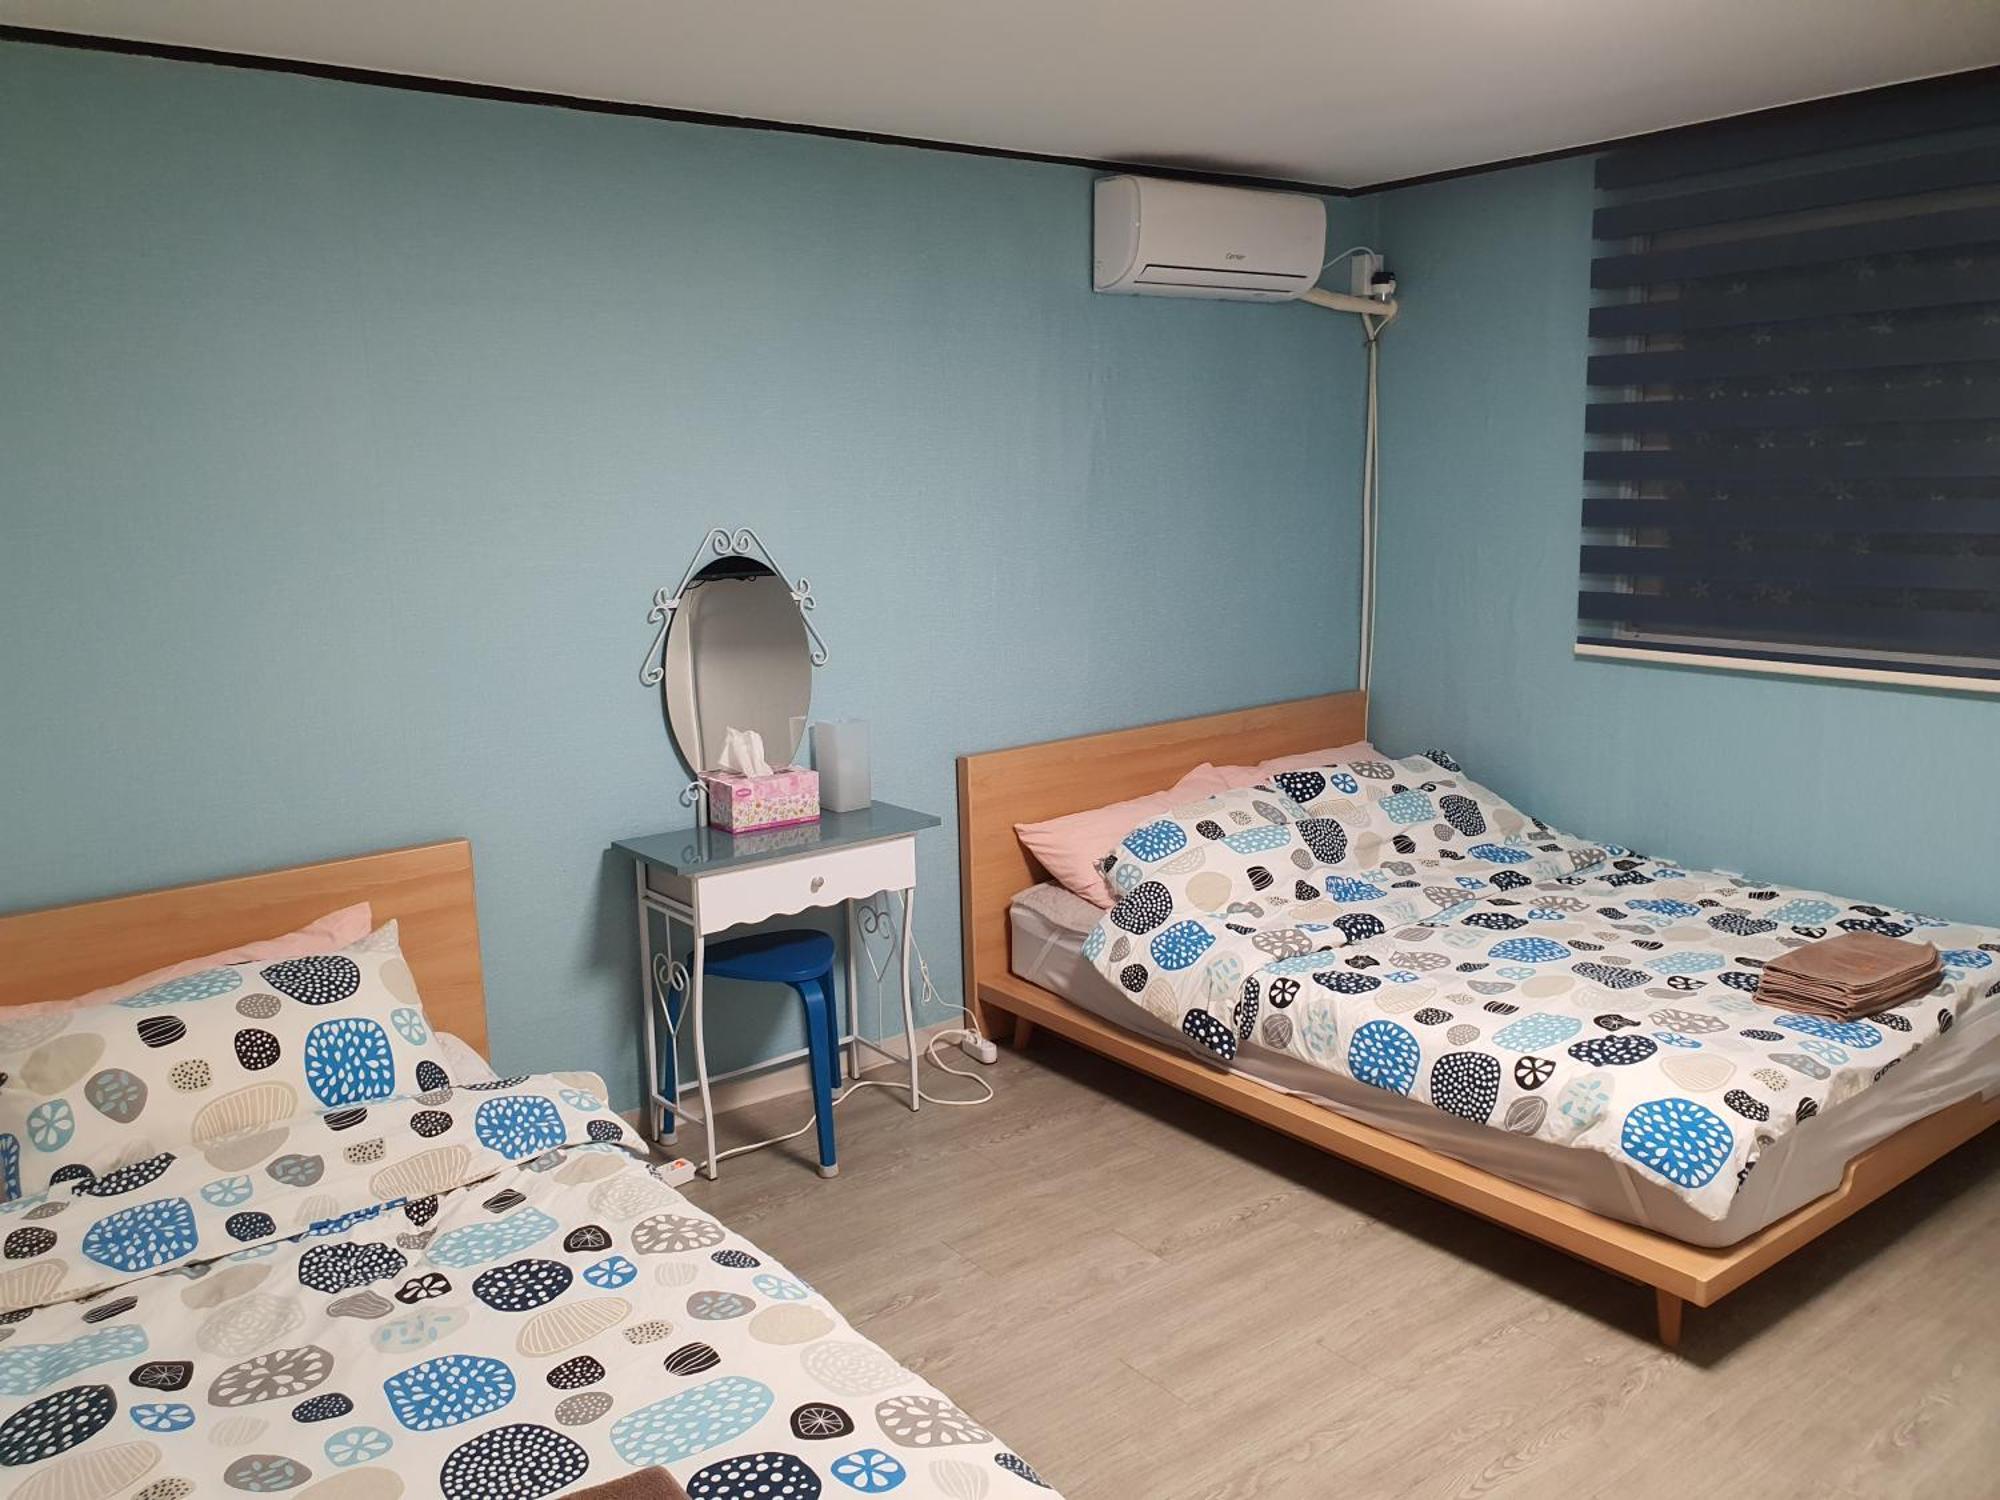 Bunk Backpackers Guesthouse Seul Esterno foto